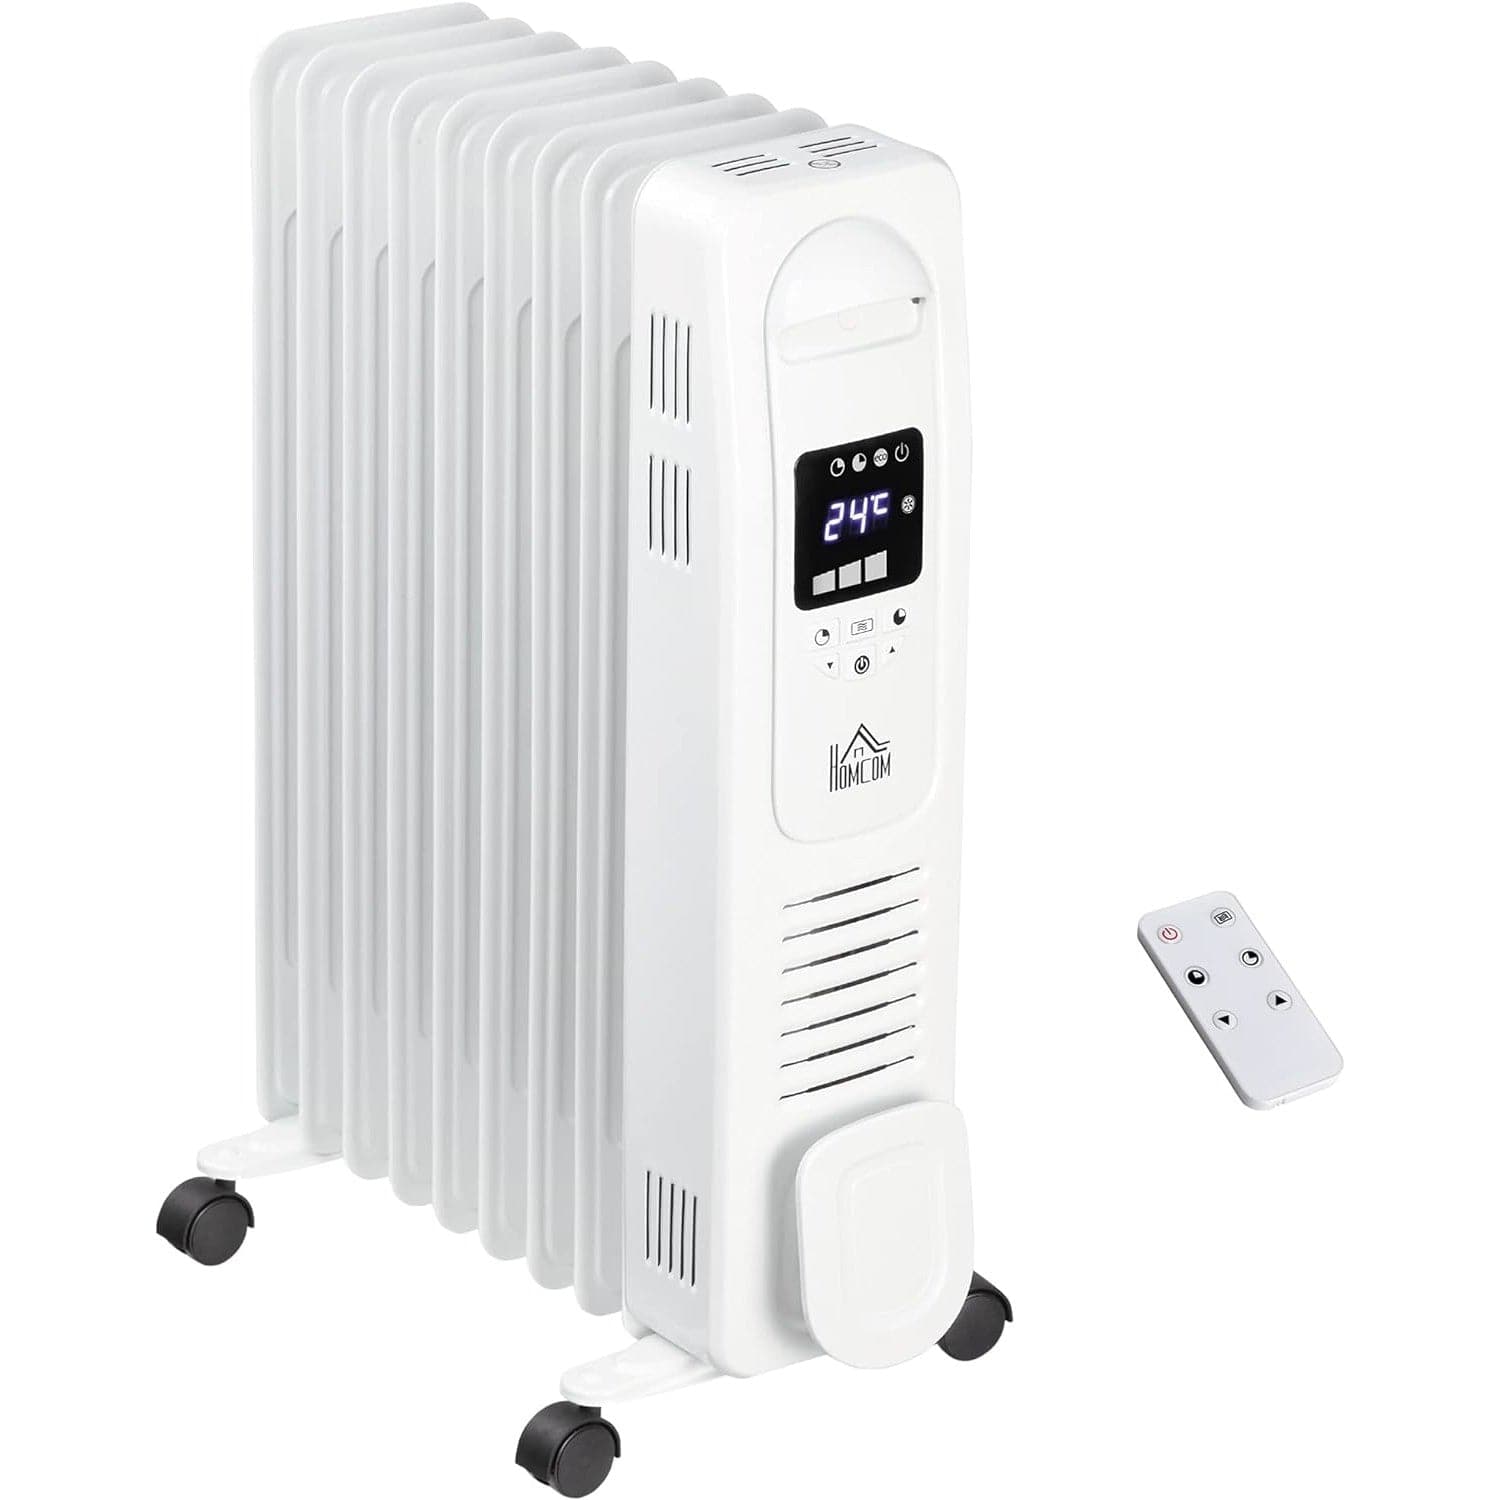 Maplin Plus 2180W Digital 9 Fin Portable Electric Oil Filled Radiator with LED Display, Timer, 3 Heat Settings, Safety Cut-Off & Remote Control (White)